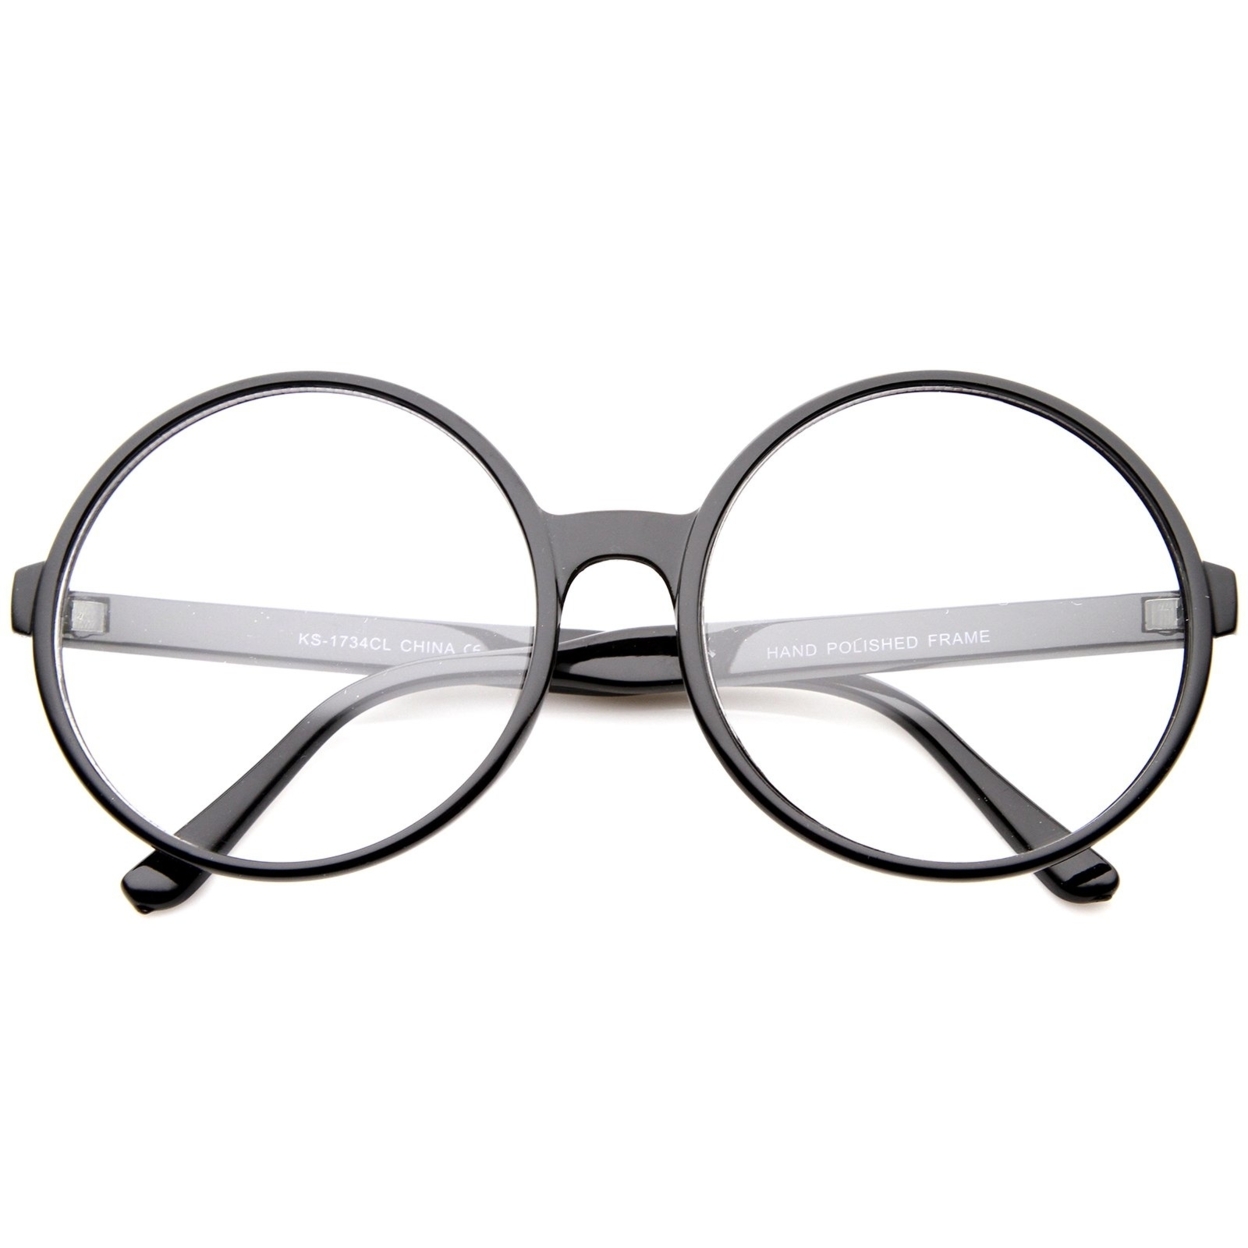 Retro Oversize Clear Lens Round Spectacles Eyewear Glasses 60mm - Black / Clear